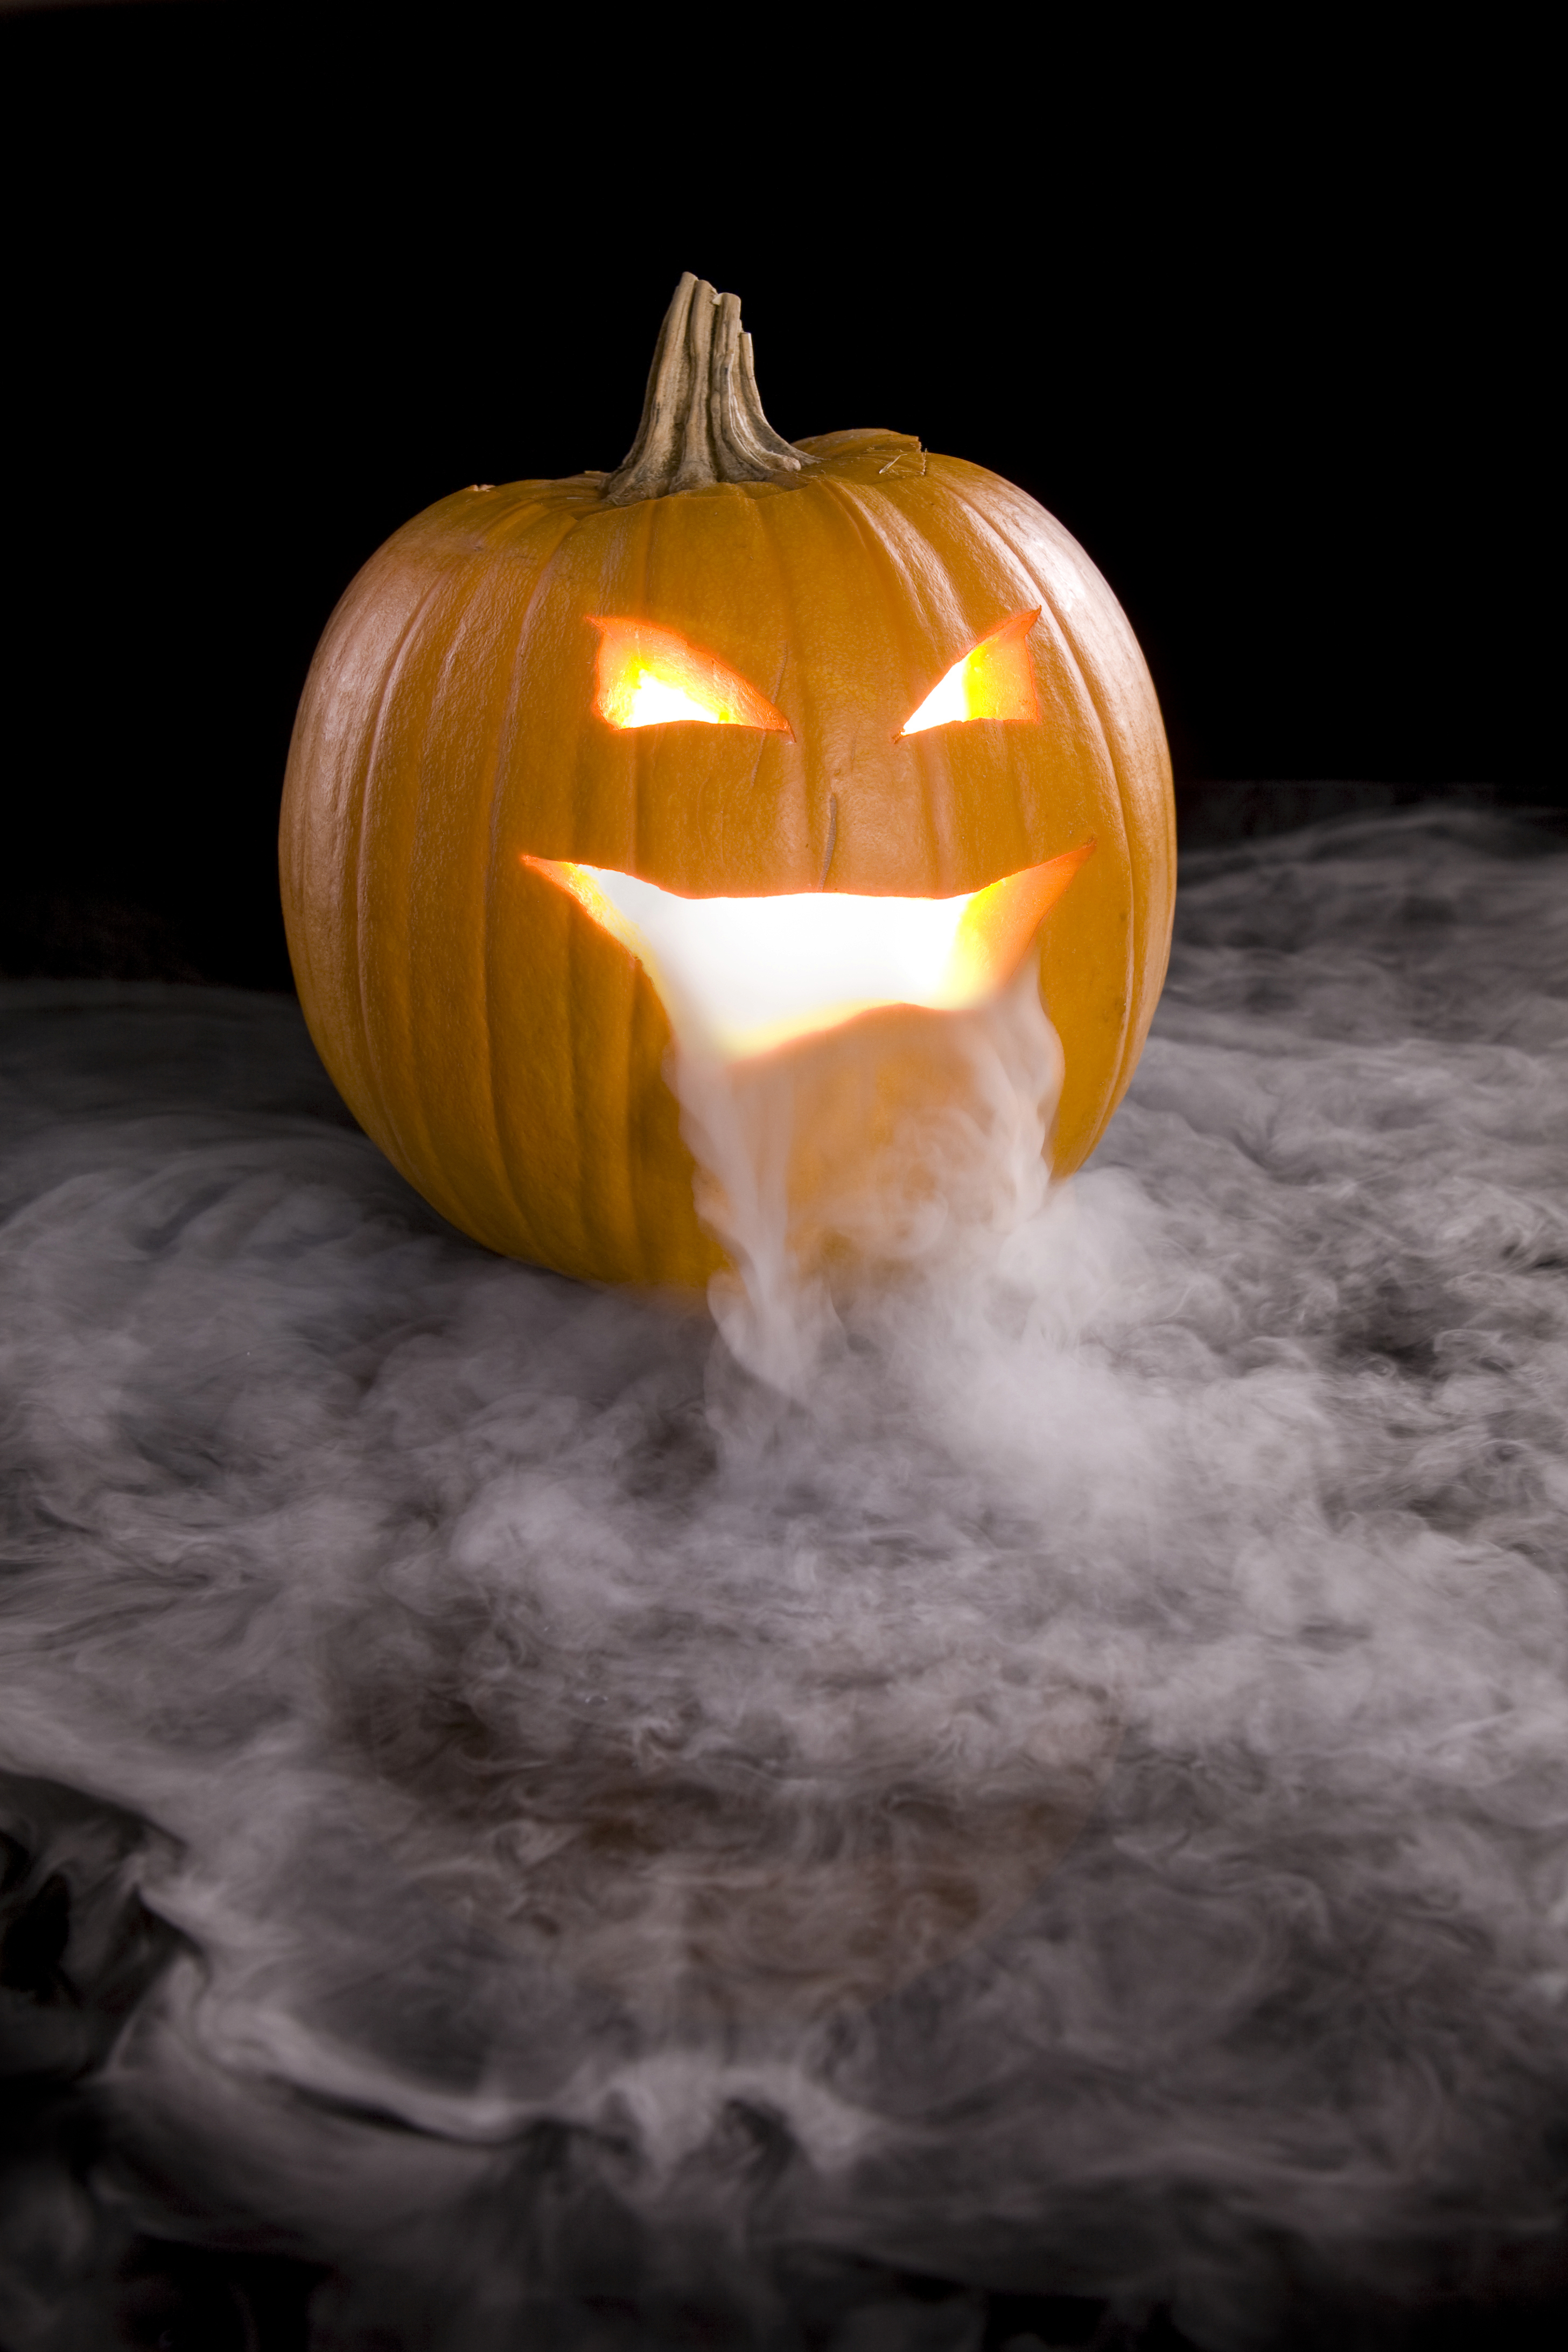 dry ice corp Use Dry Ice This Halloween Safely